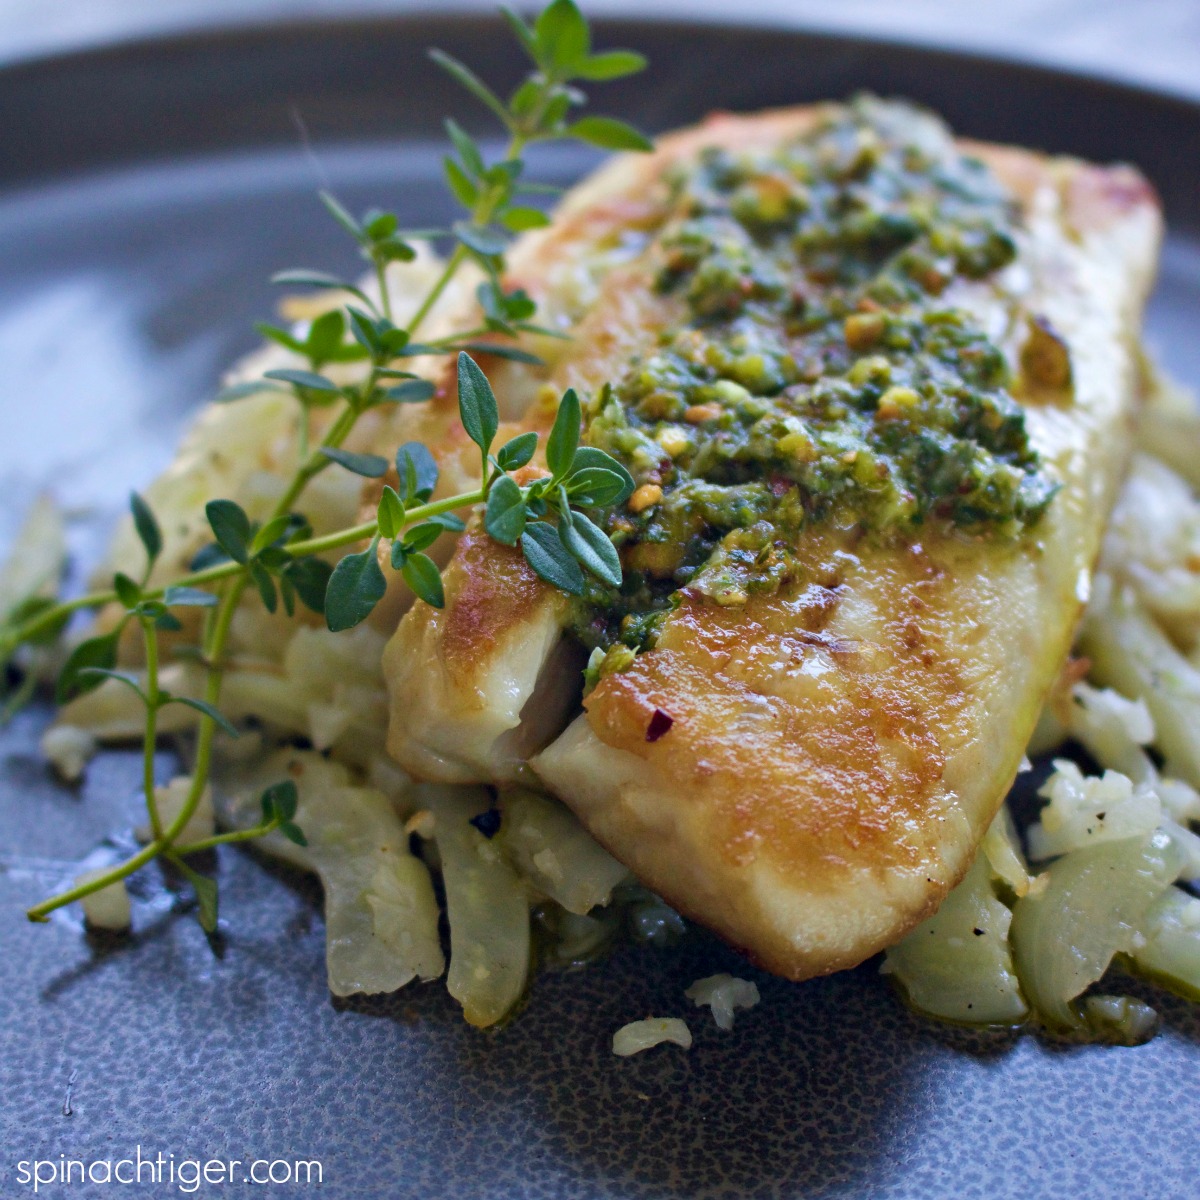 Baked Red Snapper Recipe with Pistachio Pesto with Cauliflower Rice from Spinach TIger 